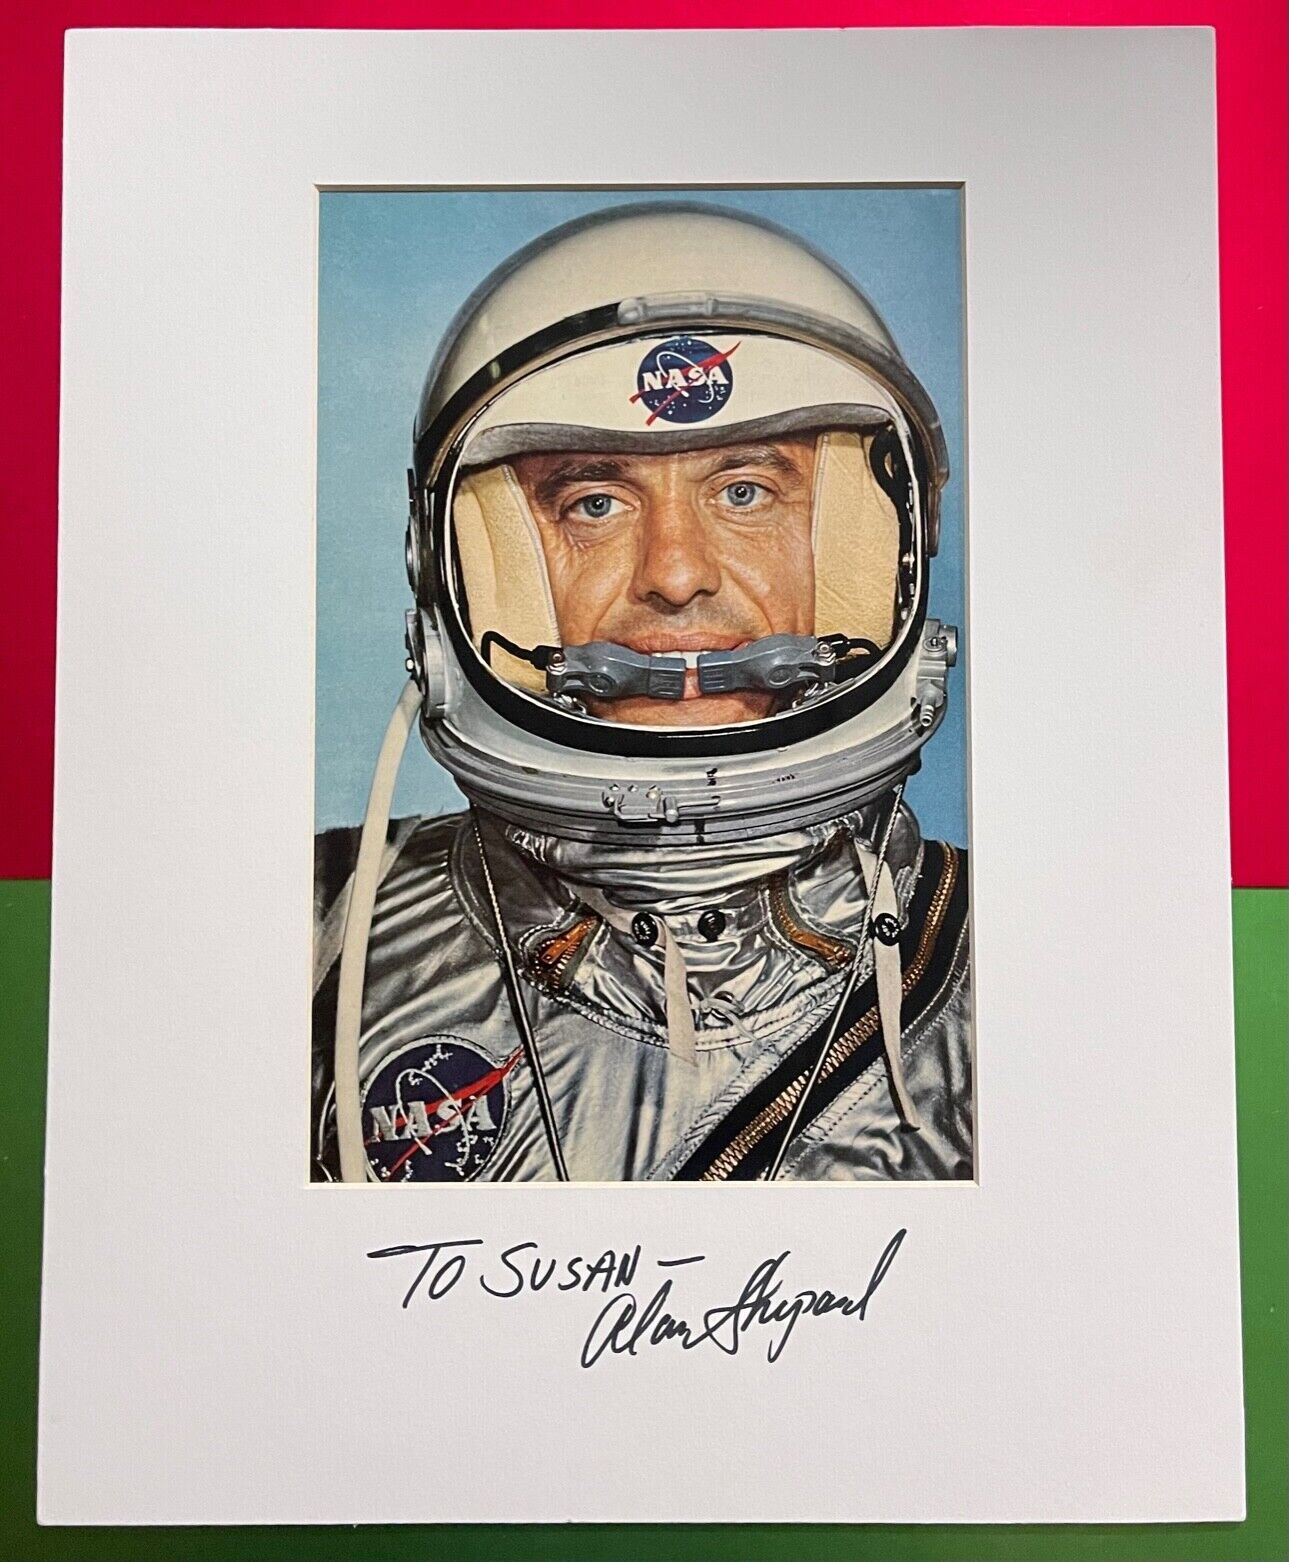 ALAN SHEPARD PROJECT MERCURY MATTED PHOTO HAND SIGNED INSCRIBED PICTURE PROOF